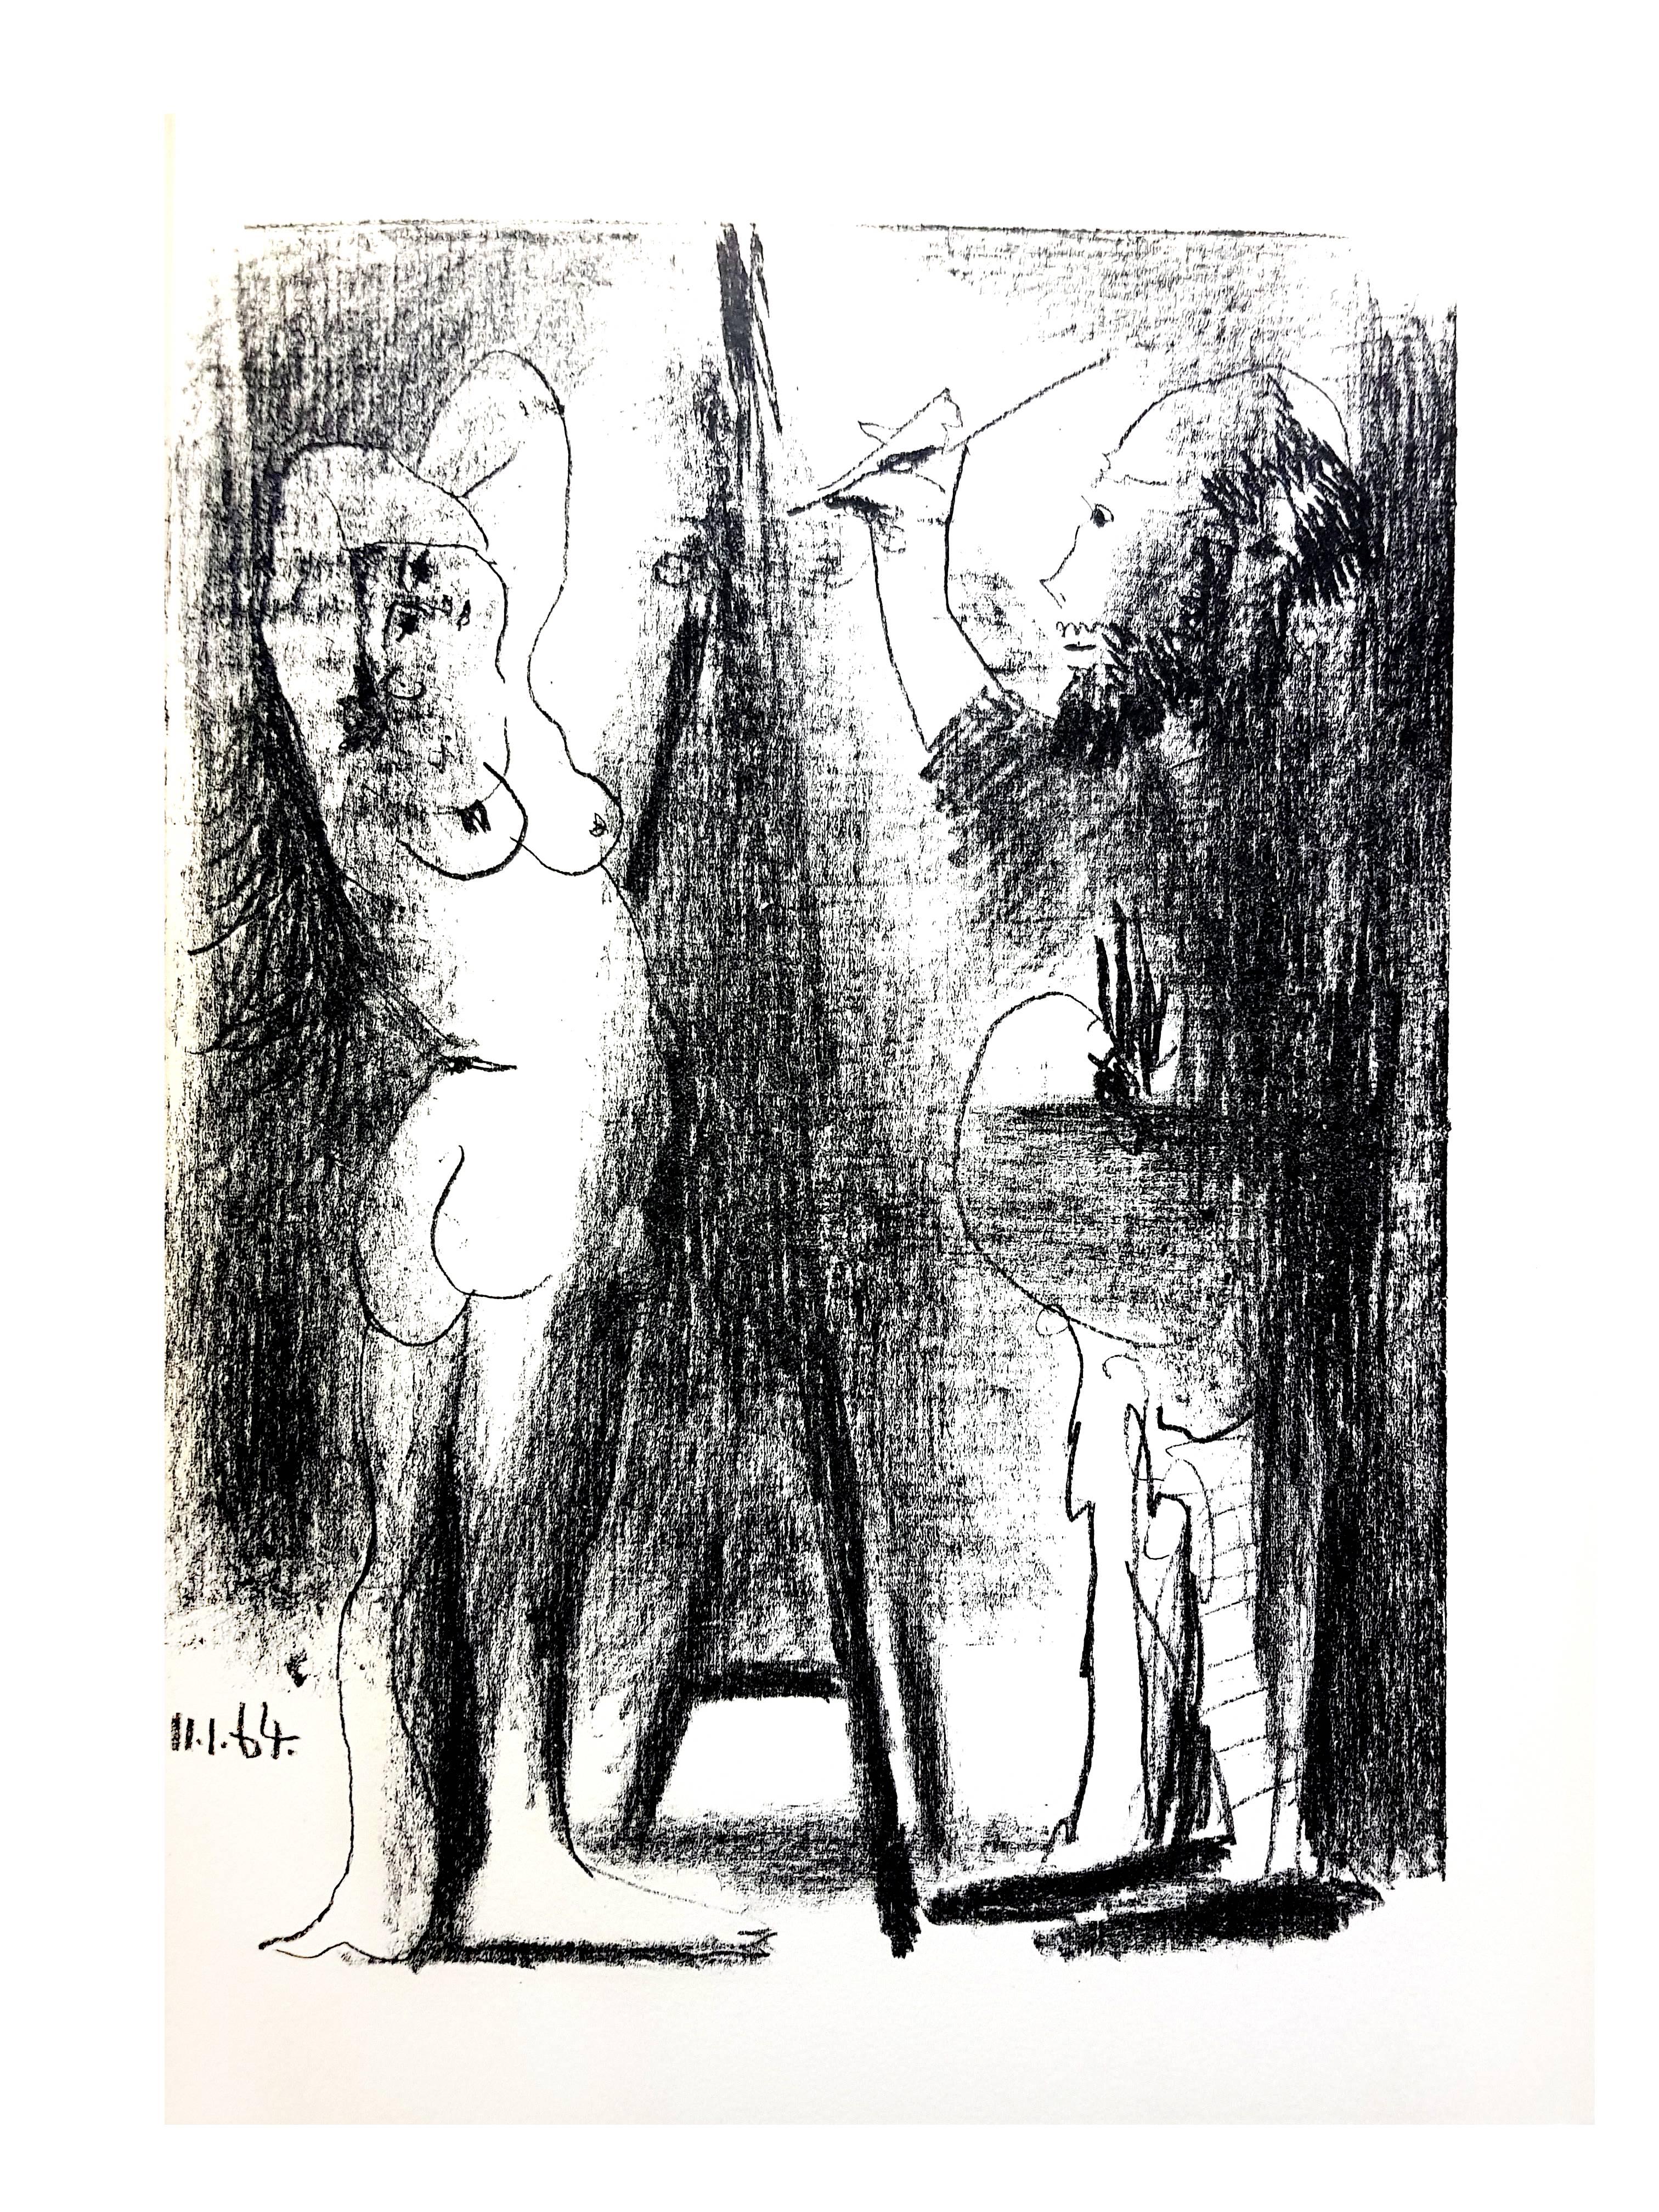 Pablo Picasso - Painter and His Model - Original Lithograph 
1964
Dimensions: 30 x 20 cm
Edition of 200 (one of the 200 on Vélin de Rives)
Mourlot Press, 1964
Unsigned and unumbered as issued